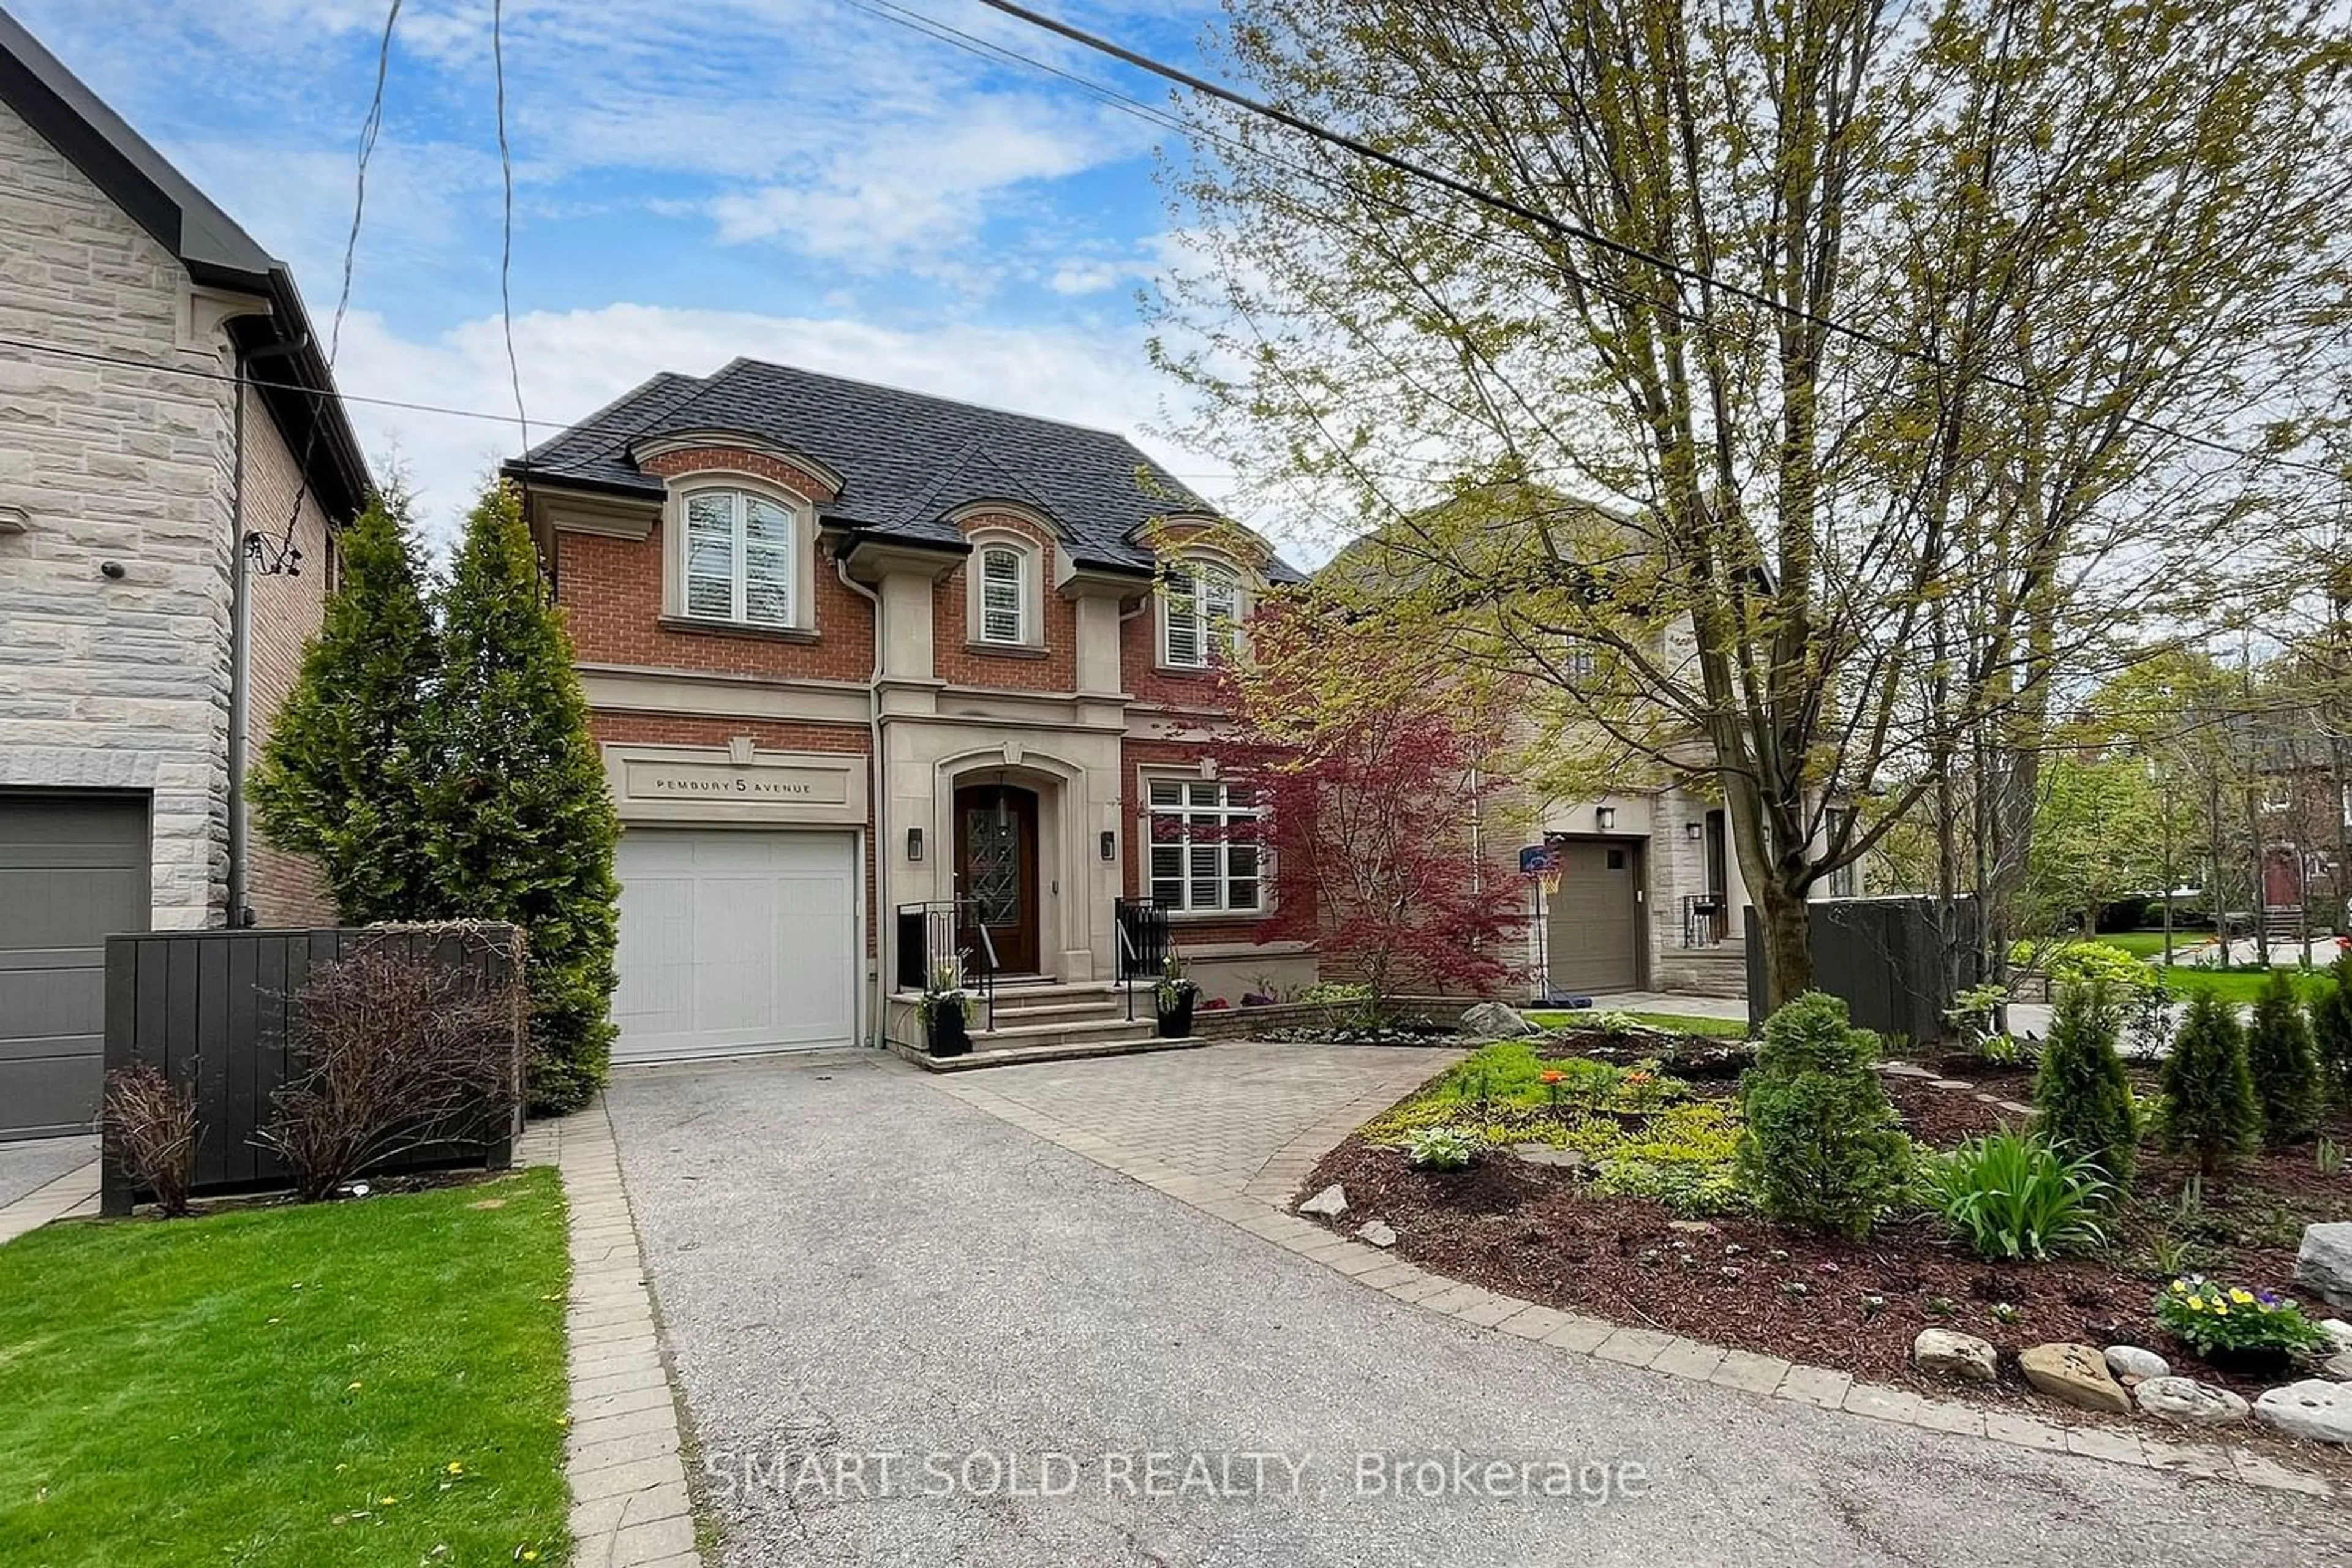 Home with brick exterior material for 5 Pembury Ave, Toronto Ontario M4N 3K4